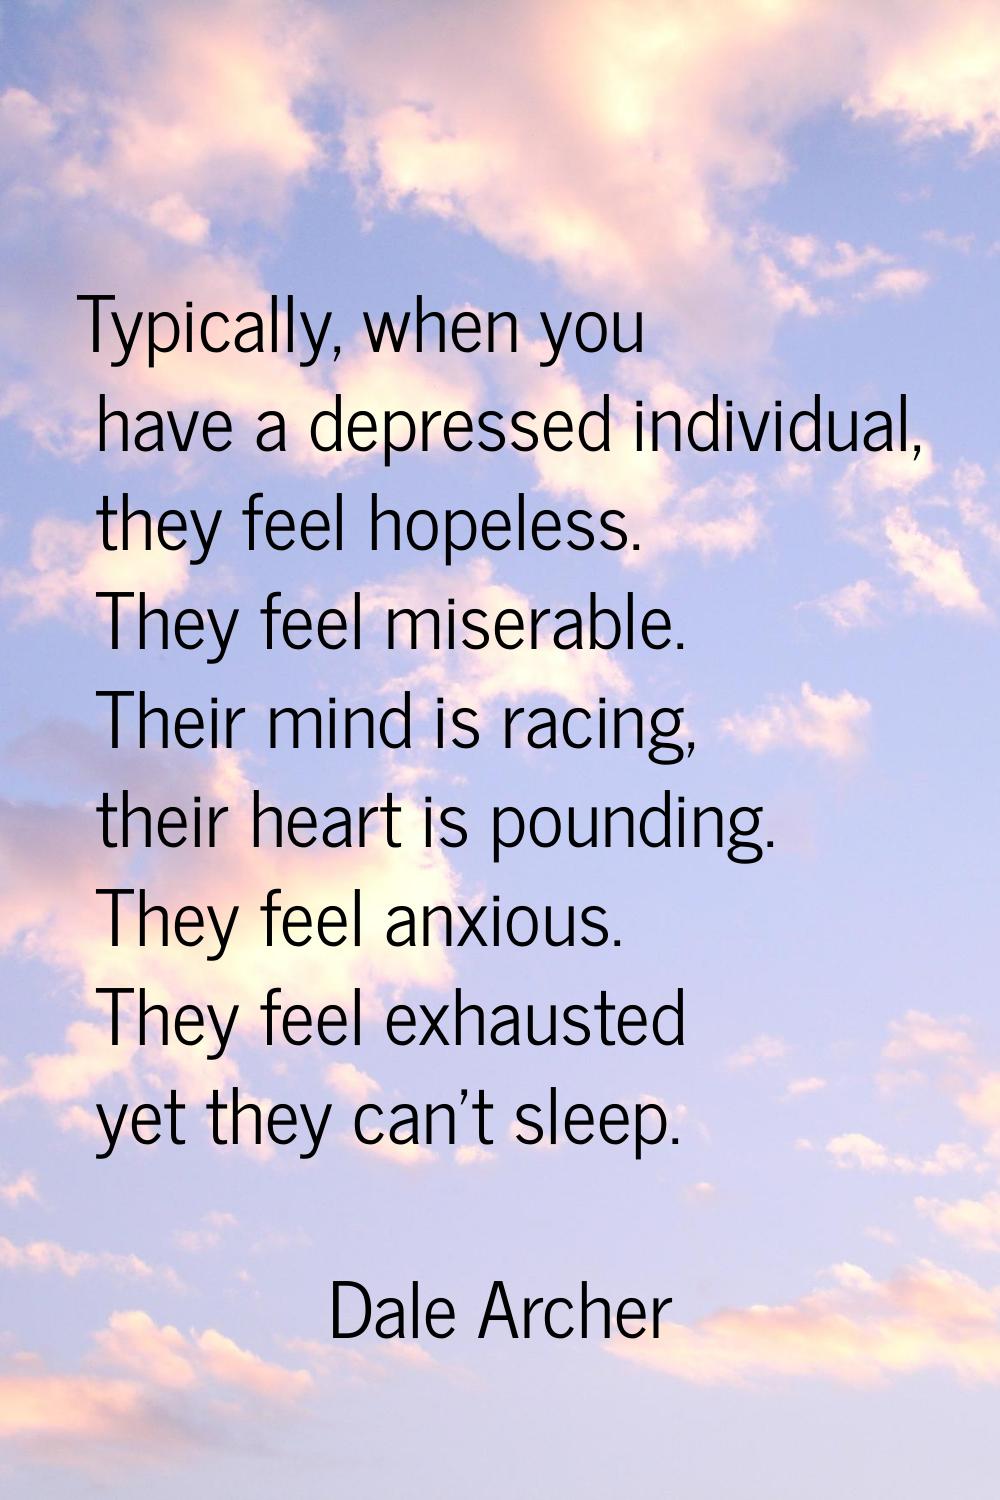 Typically, when you have a depressed individual, they feel hopeless. They feel miserable. Their min